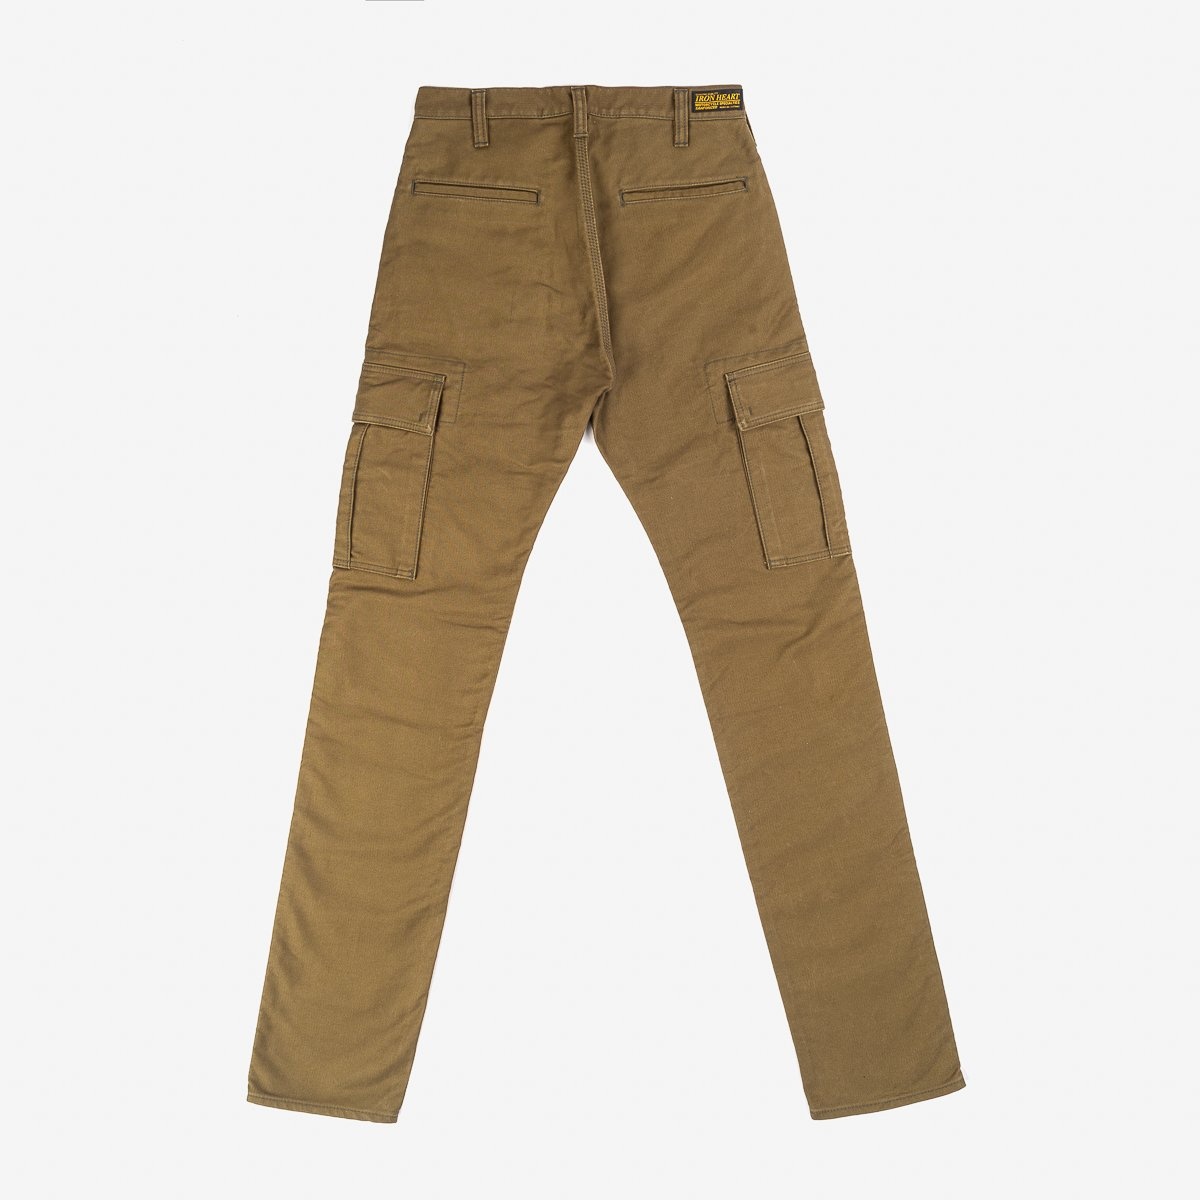 IHDR-502-OLV 11oz Cotton Whipcord Cargo Pants - Olive - 5